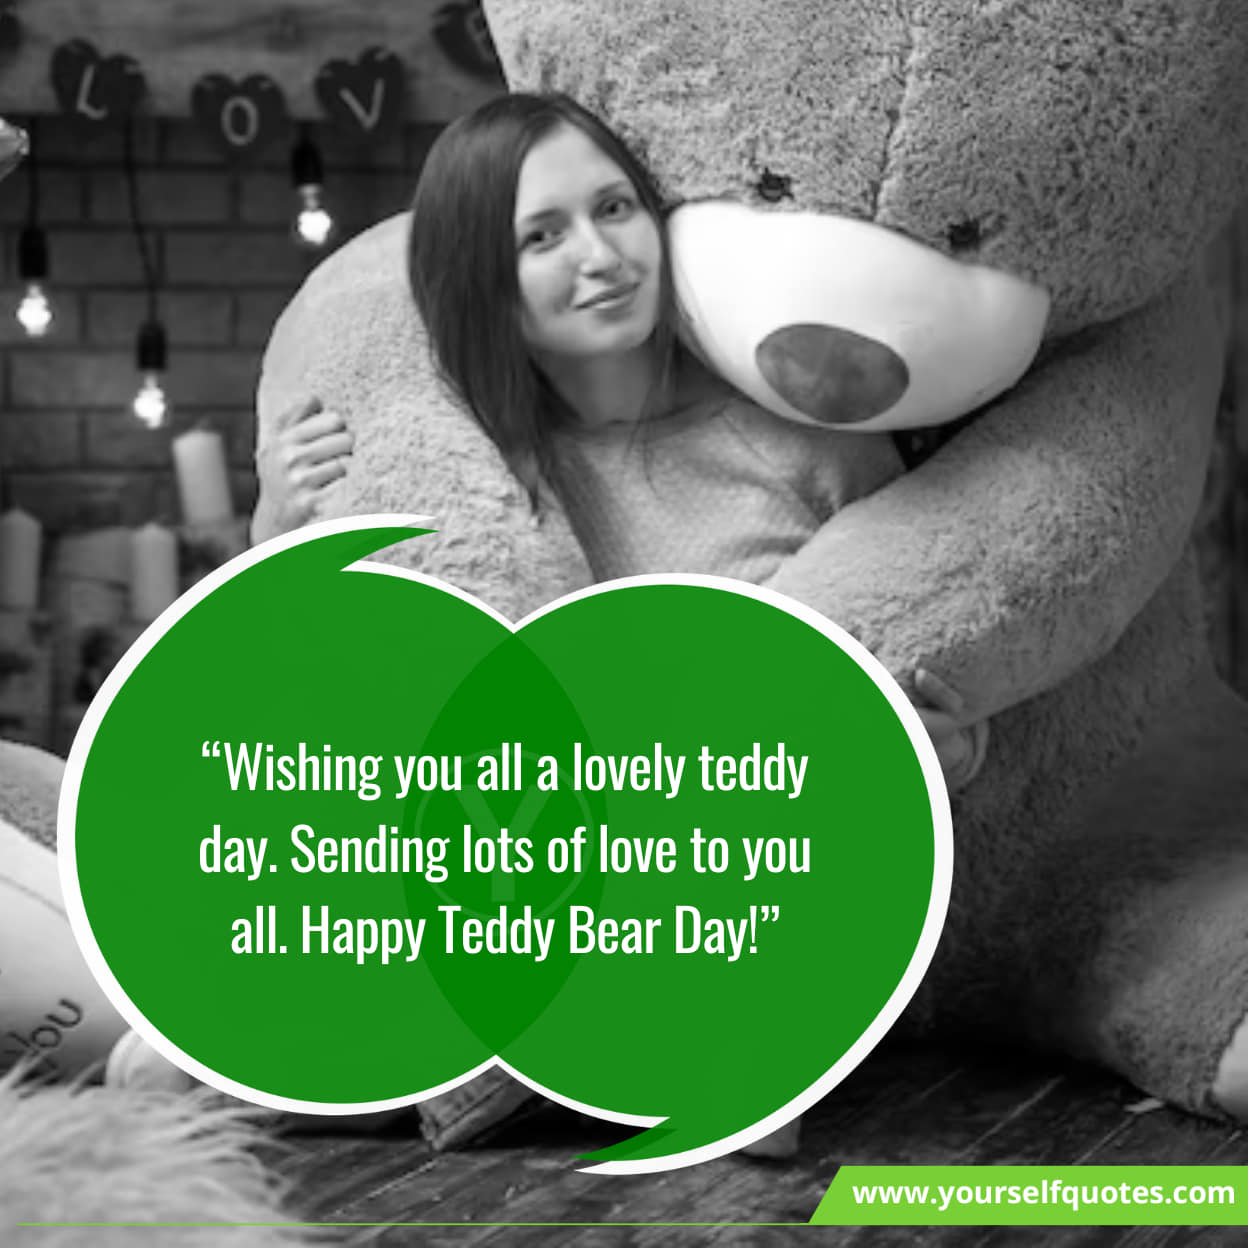 Celebrating love with Teddy Day quotes